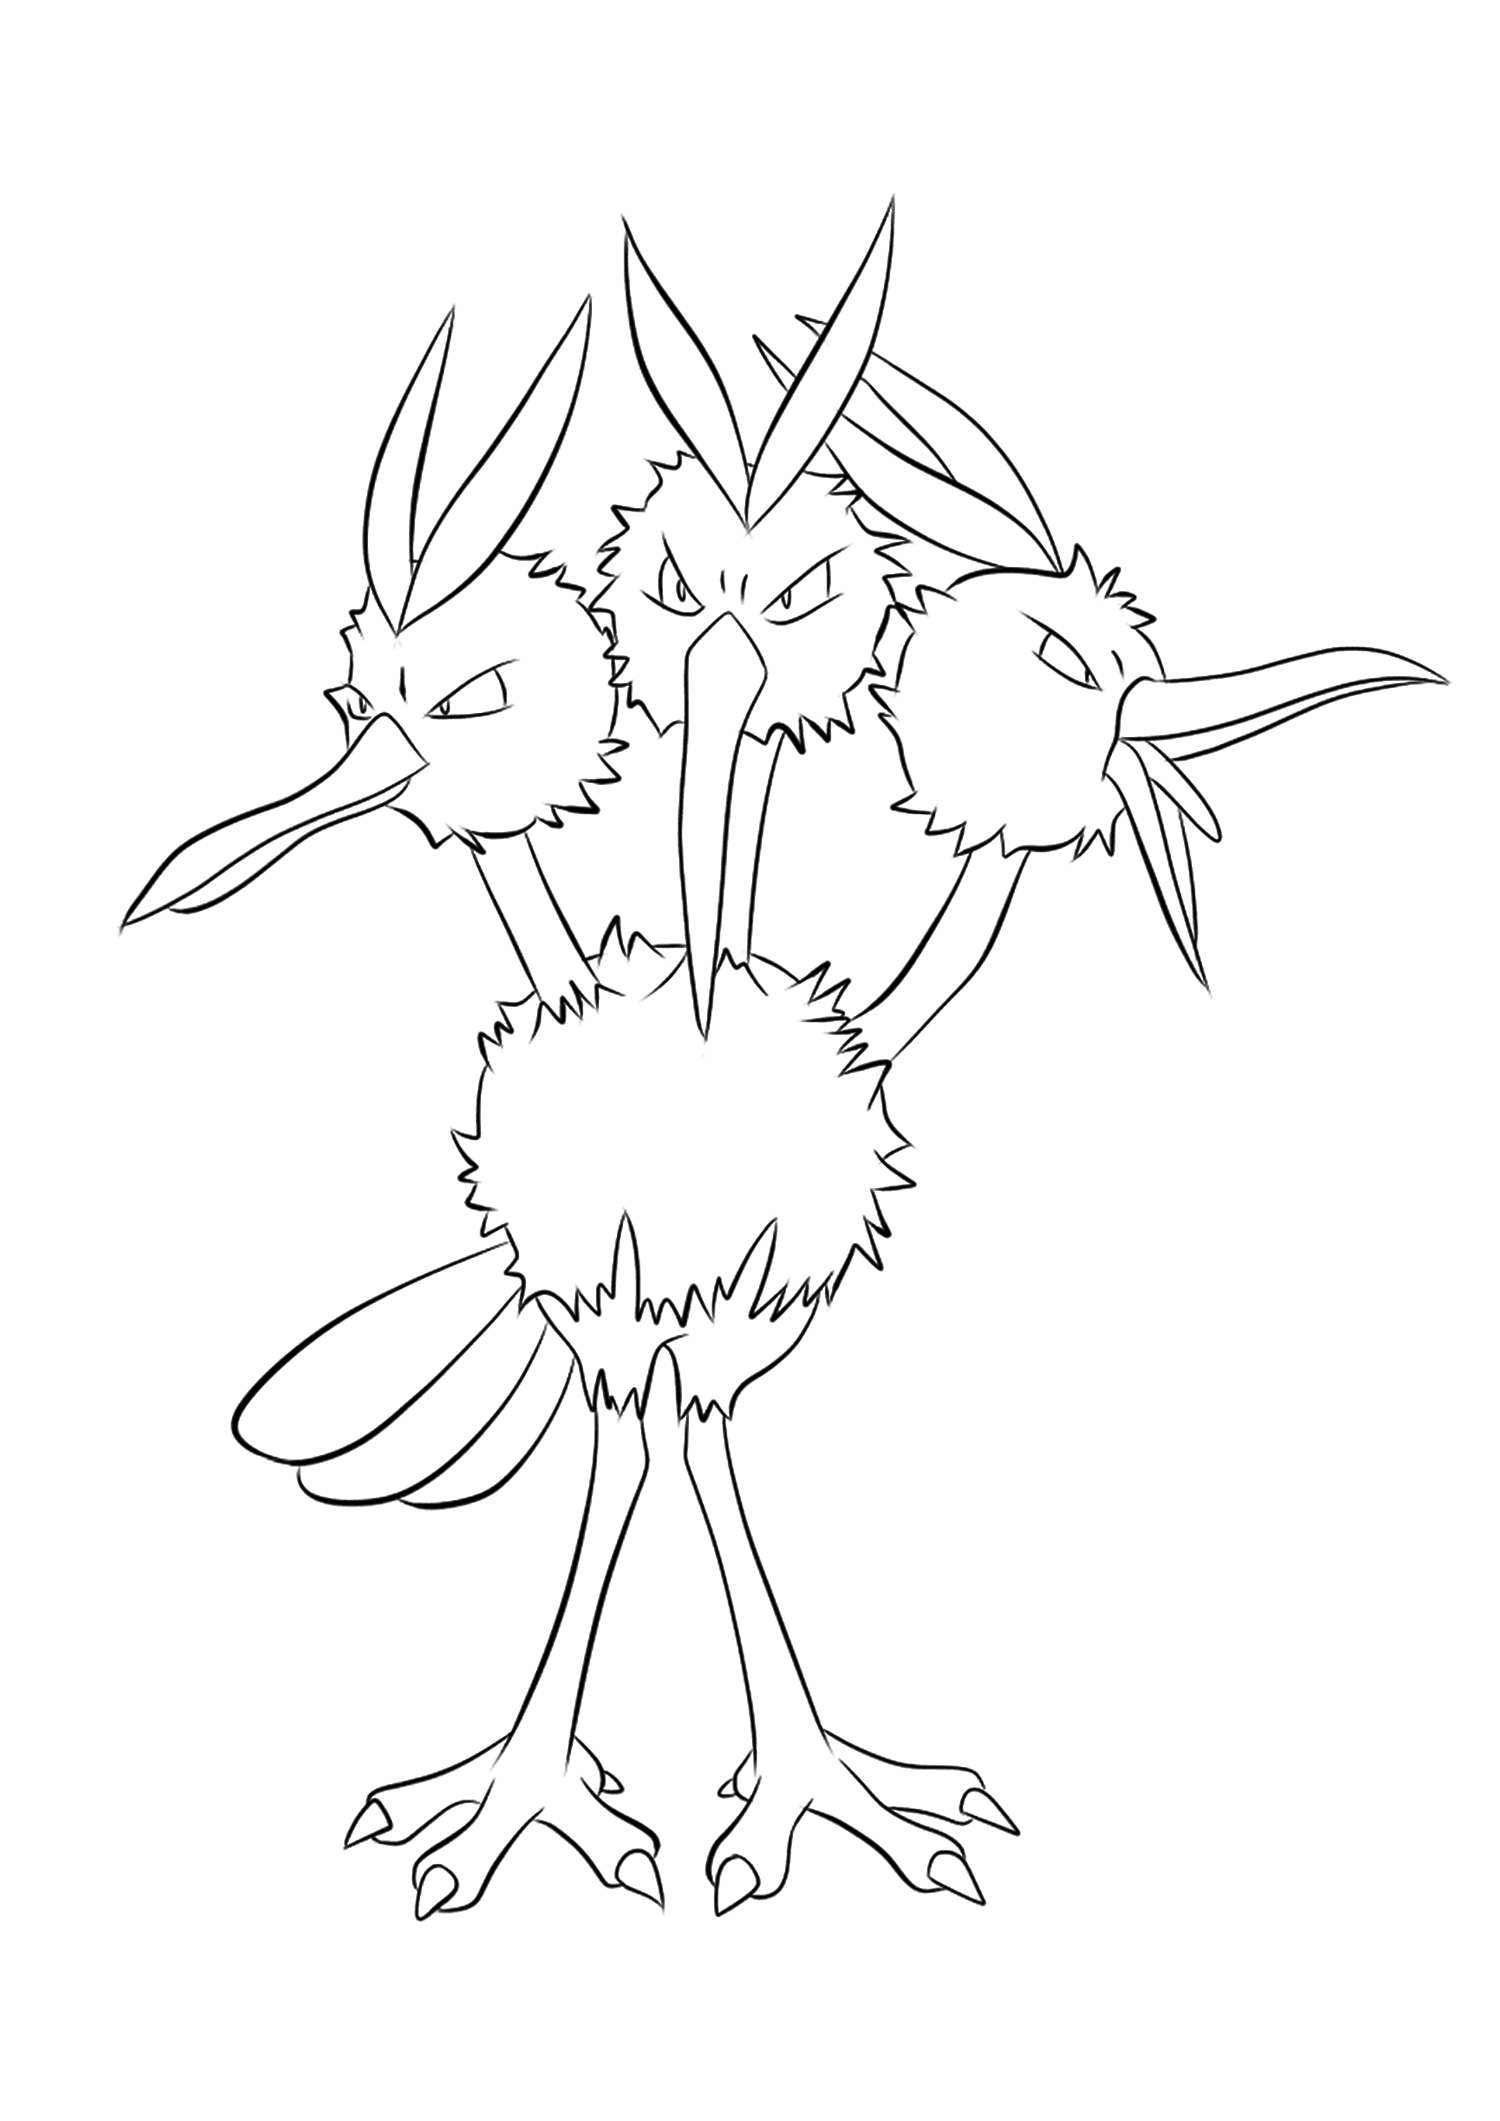 Dodrio (No.85). Dodrio Coloring page, Generation I Pokemon of type Normal and FlyingOriginal image credit: Pokemon linearts by Lilly Gerbil on Deviantart.Permission:  All rights reserved © Pokemon company and Ken Sugimori.